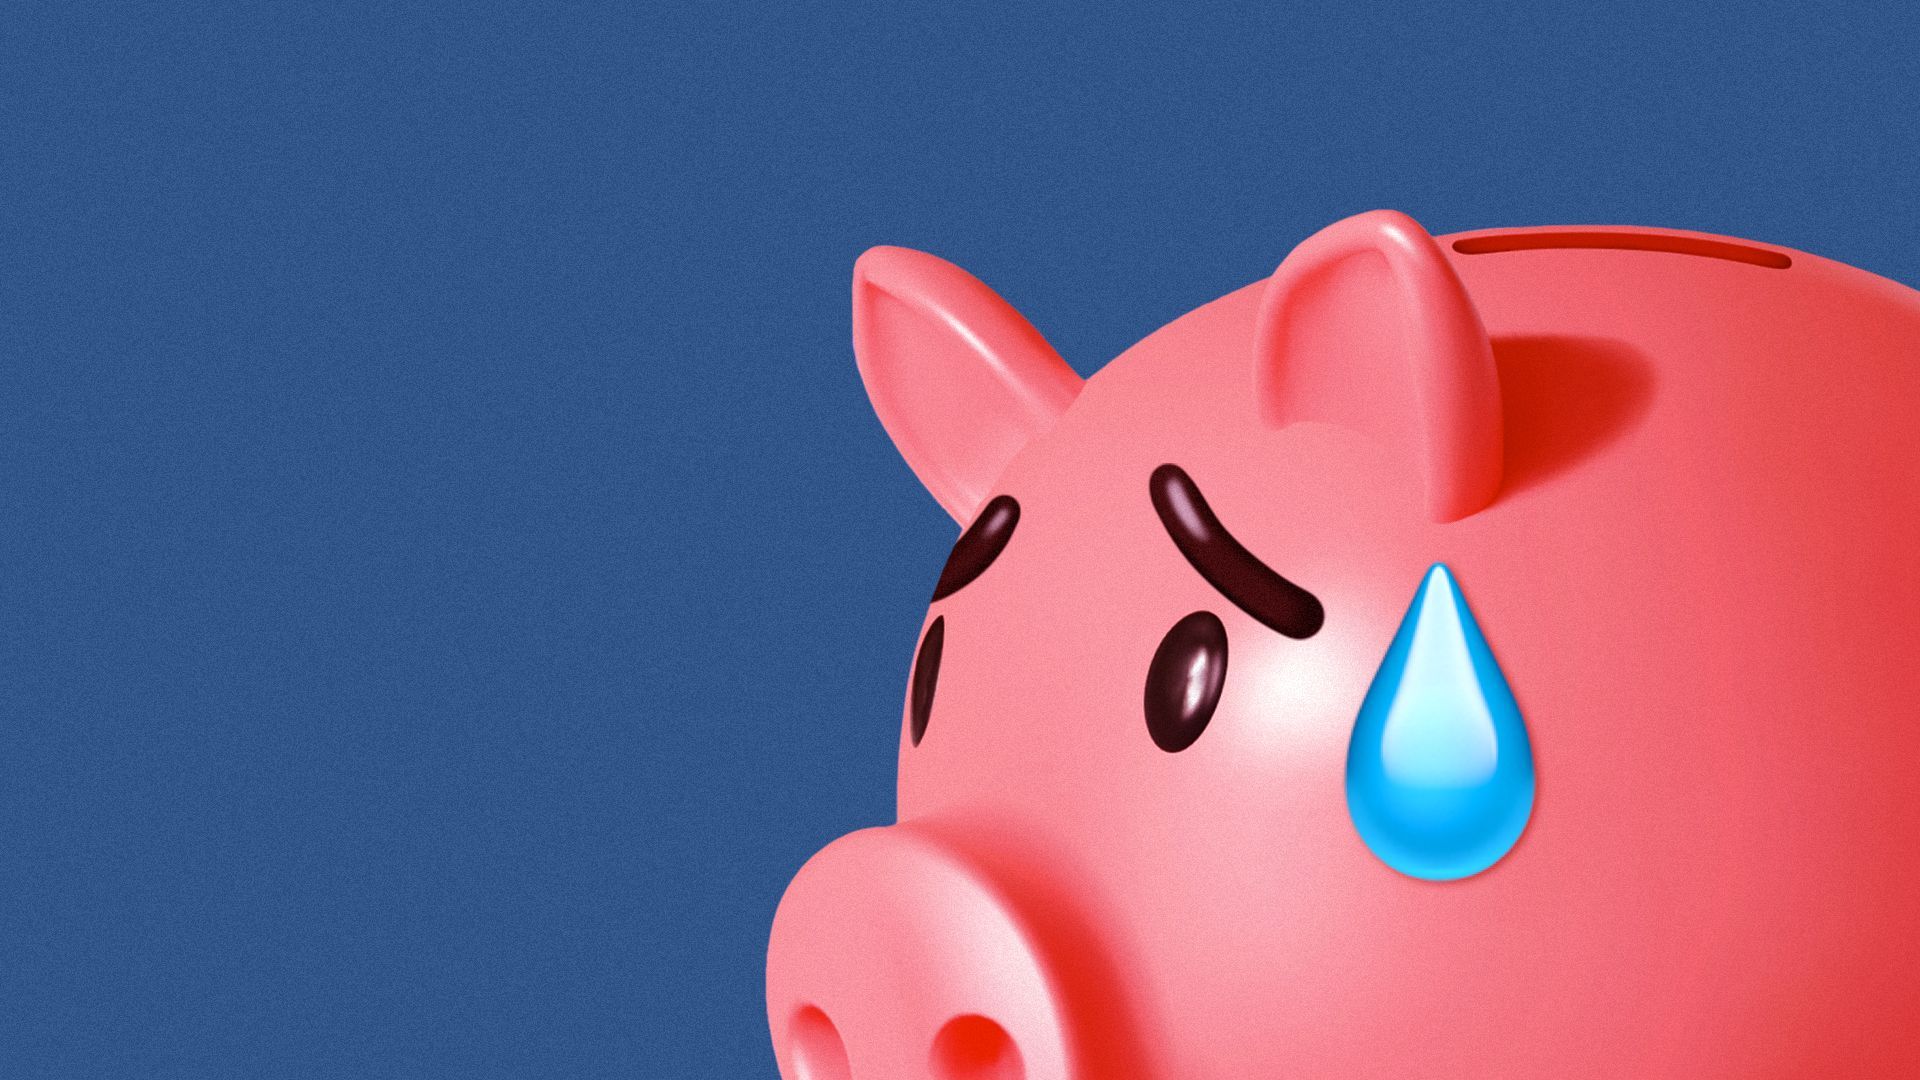 Illustration of a nervous piggy bank with a sweat drop on its face.